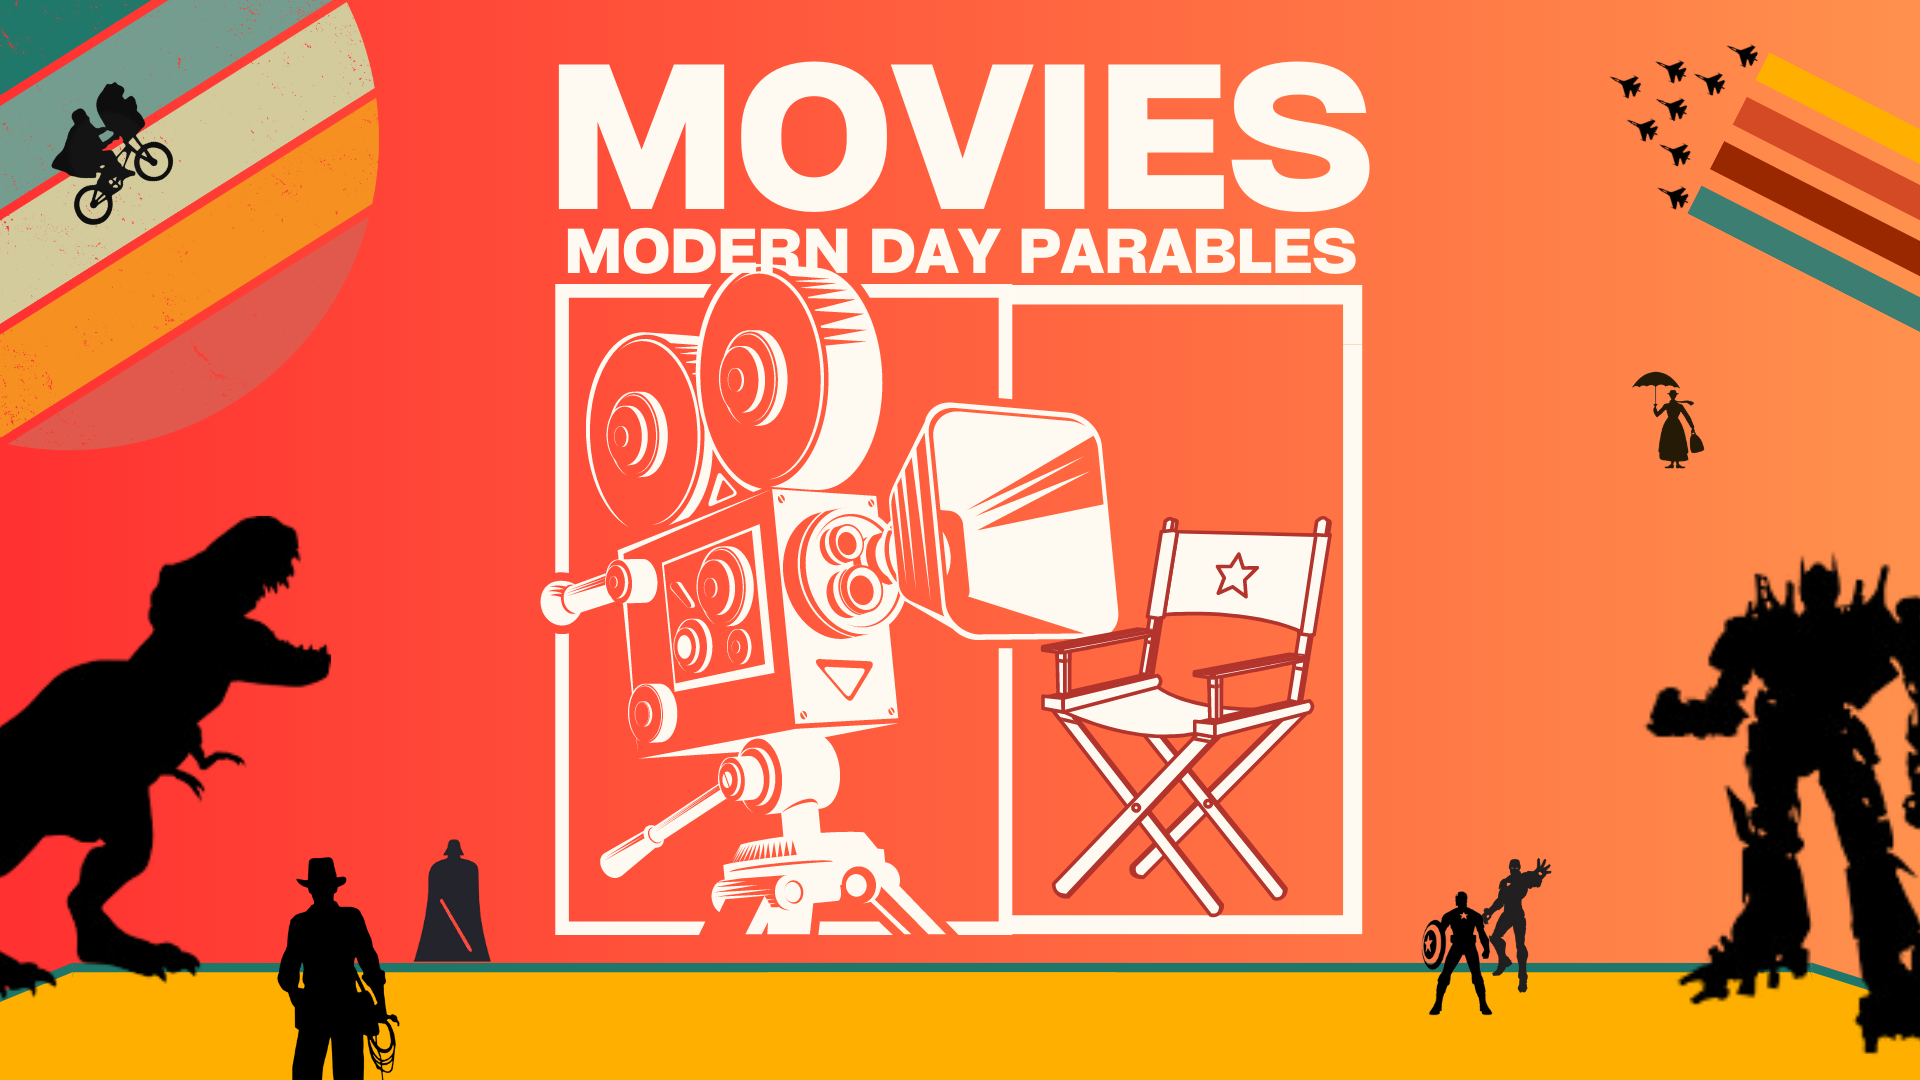 Movies Modern Day Parables, Week 5